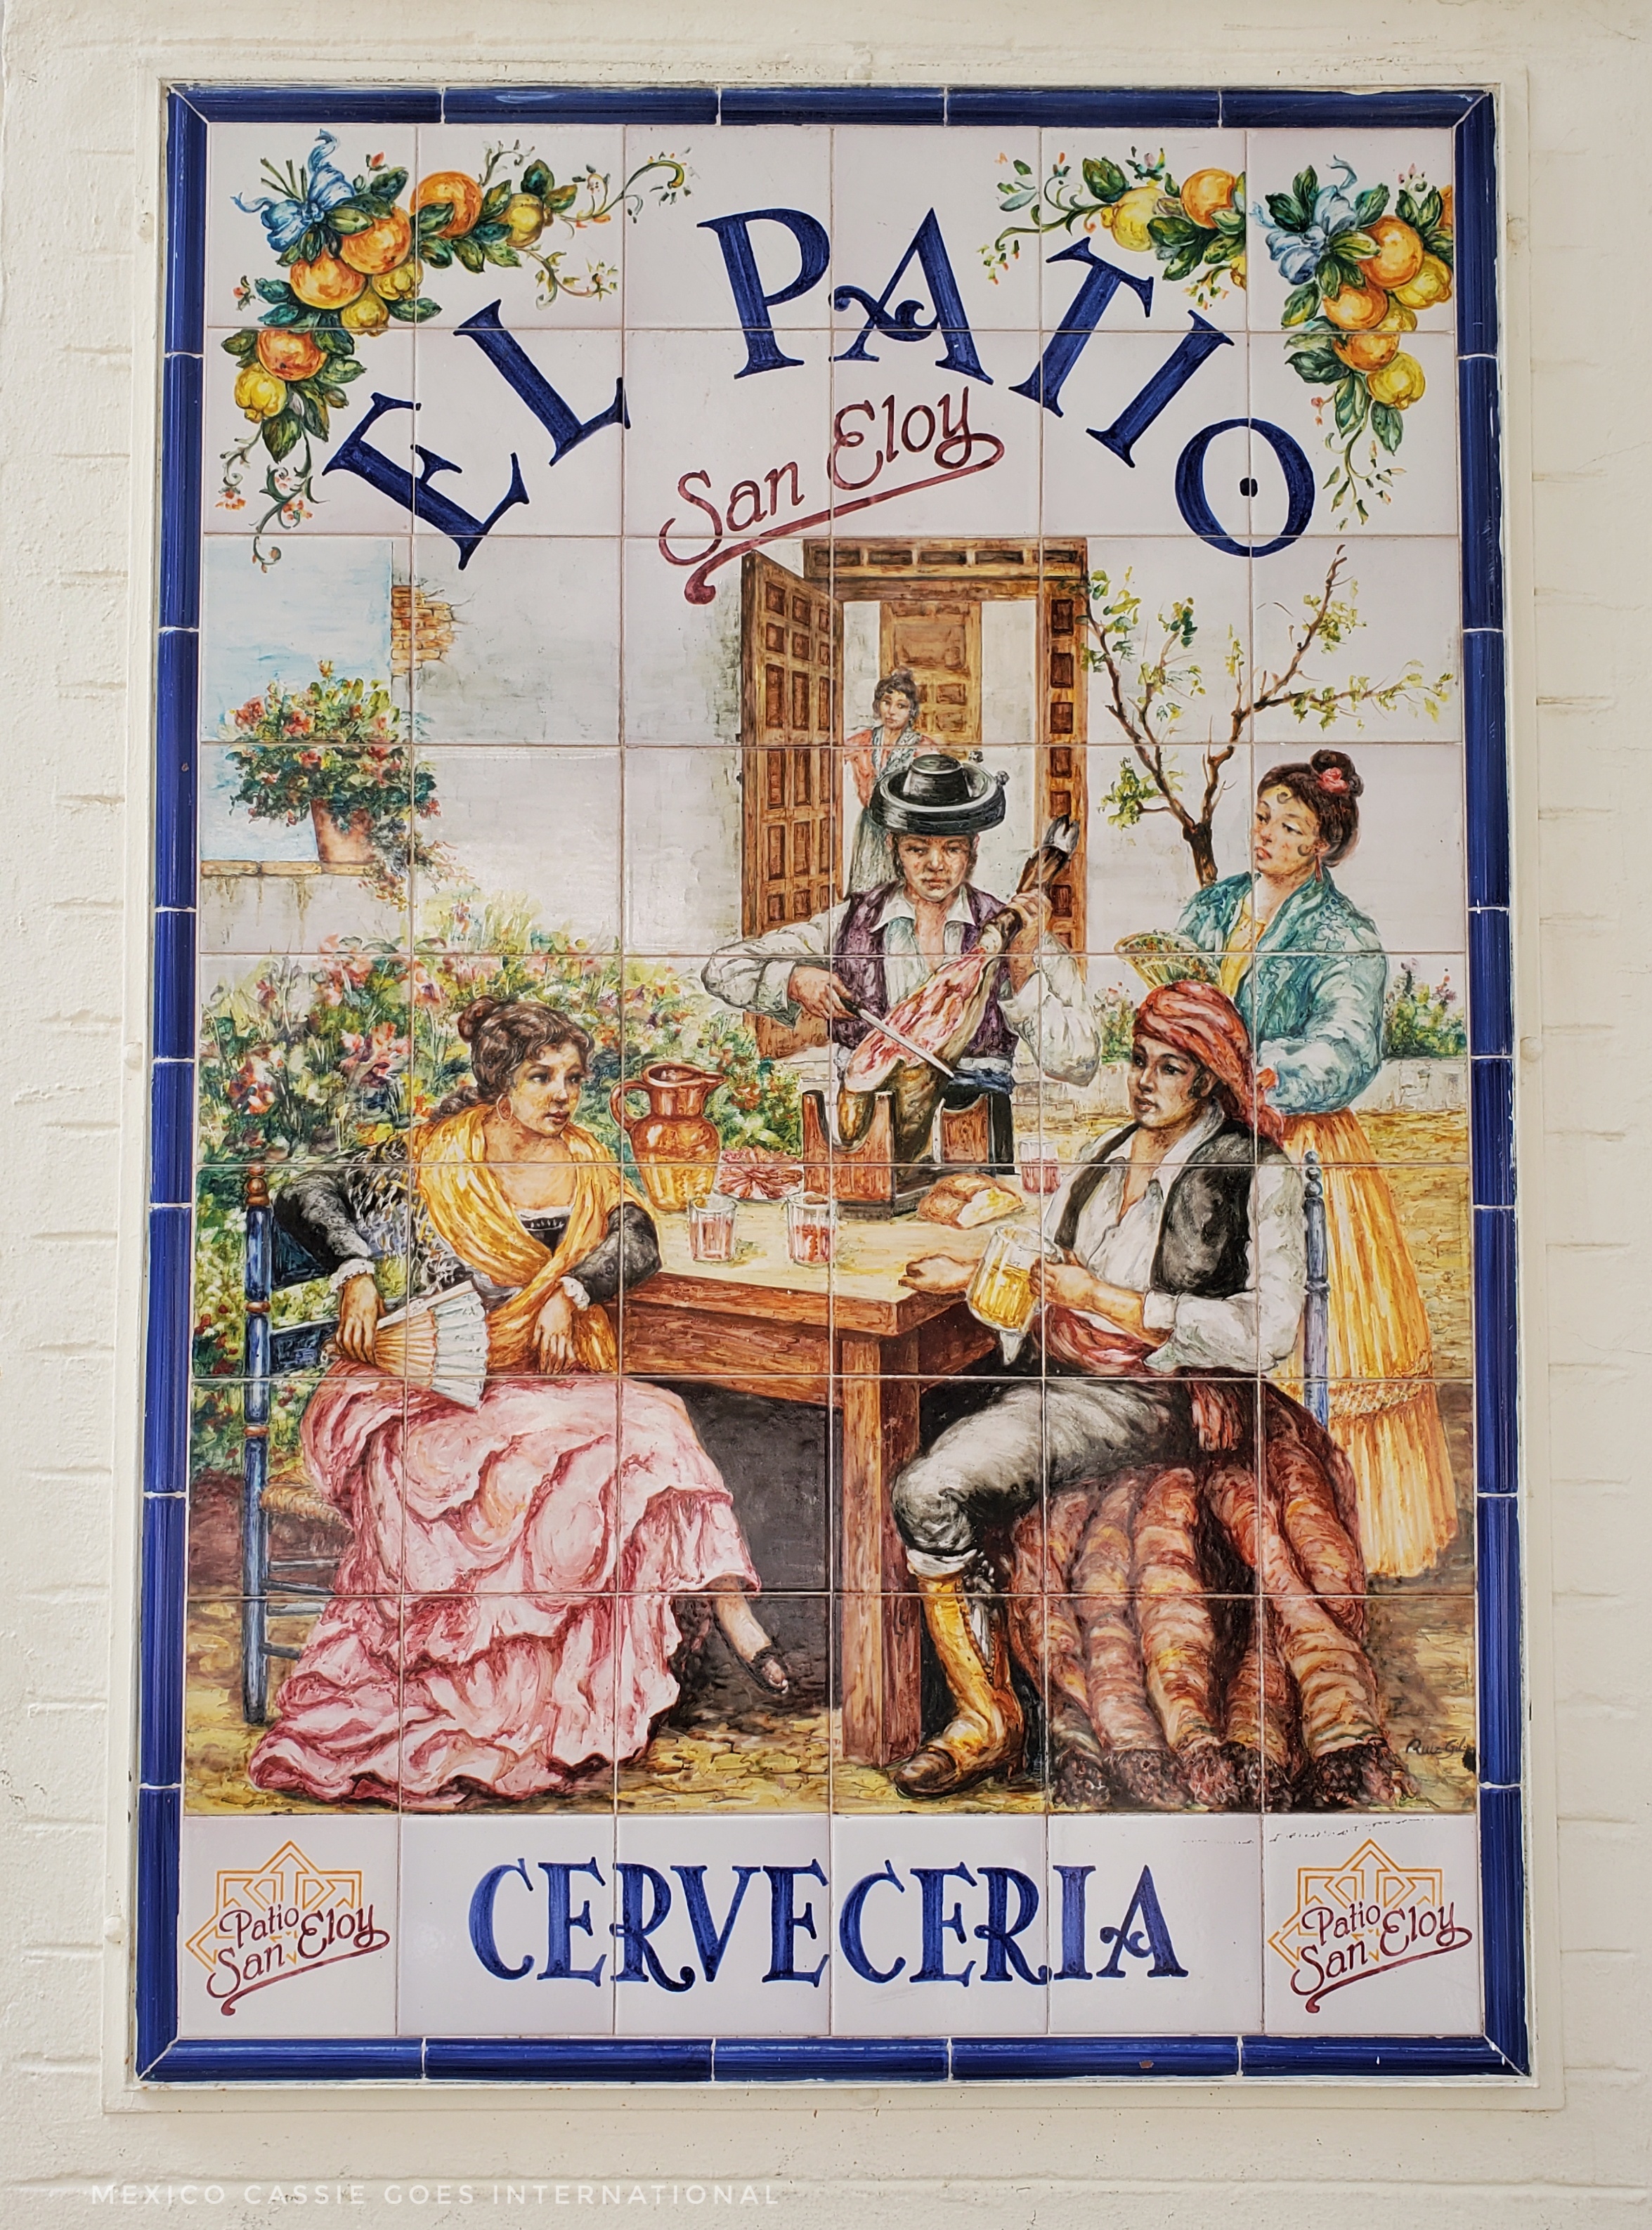 tile wall poster  - writing says, EL Patio and Cerveceria. Picture is of 19thcentury people around a table